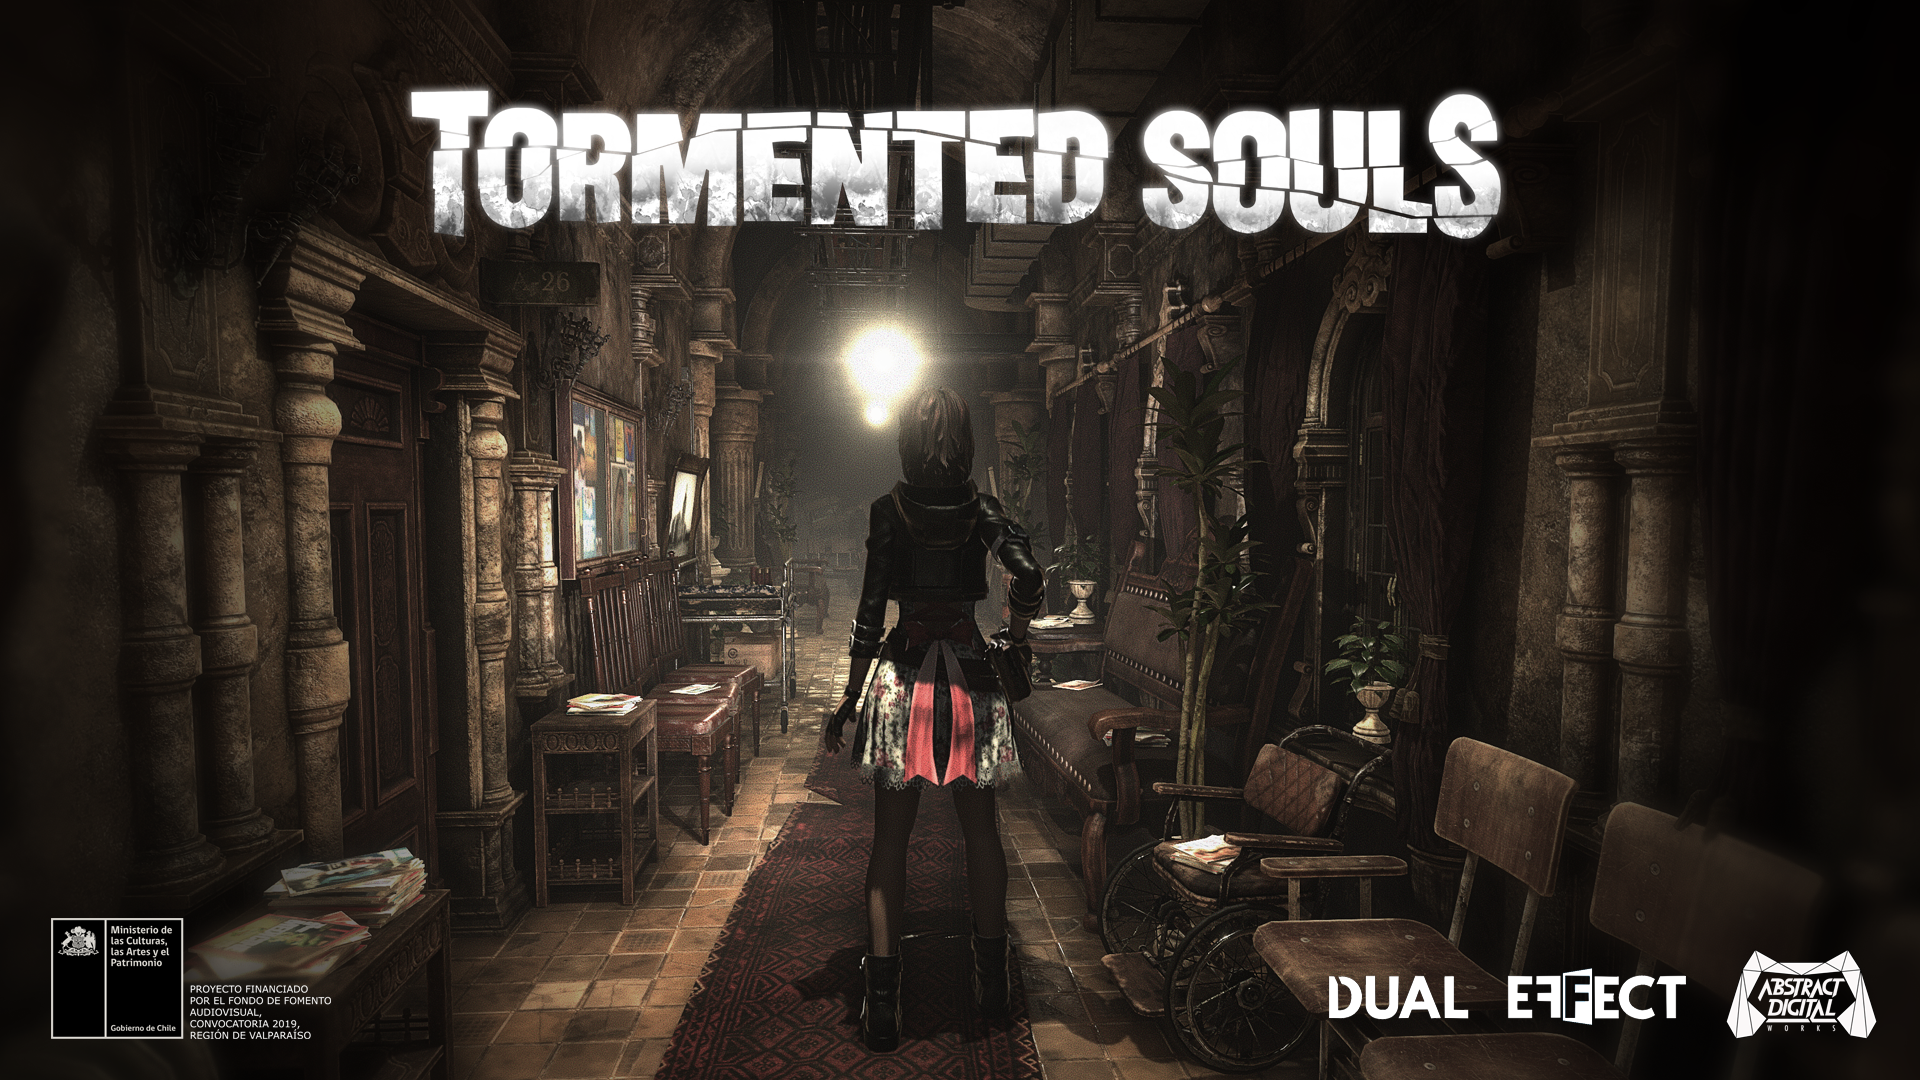 tormented souls story explained